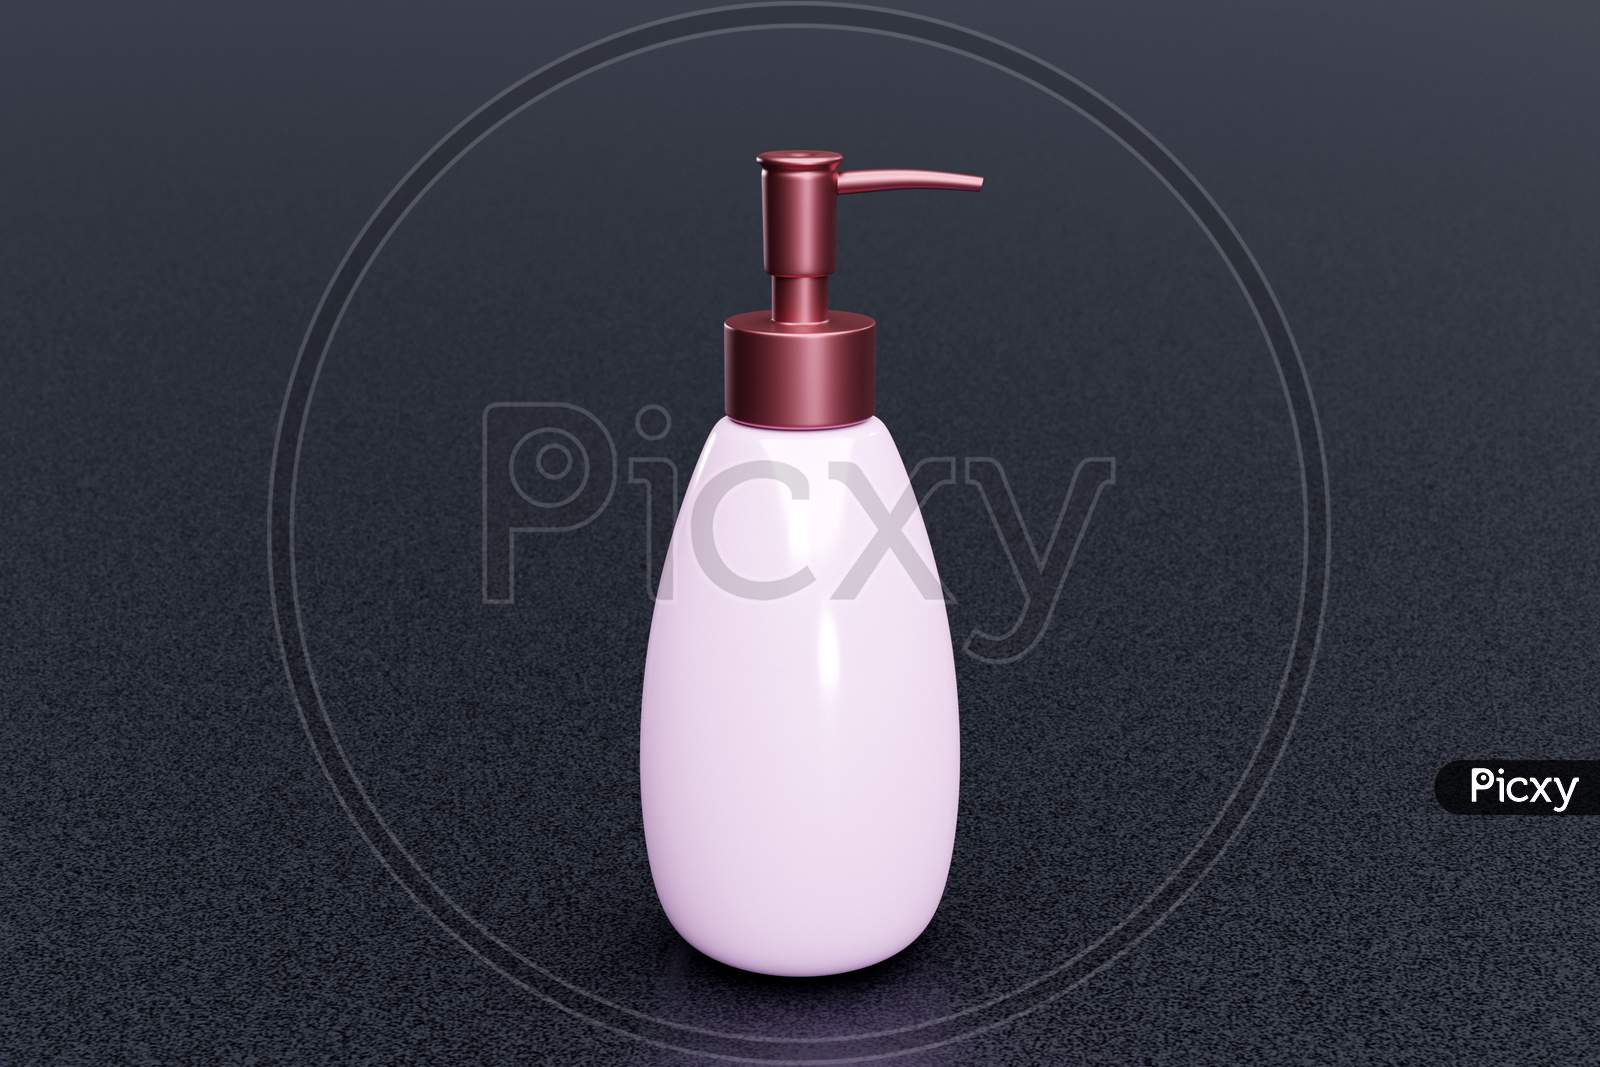 White Cosmetic Bottle Dispenser Pump With Oval Container From Closeup Angle. 3D Illustration Isolated On Black Background.